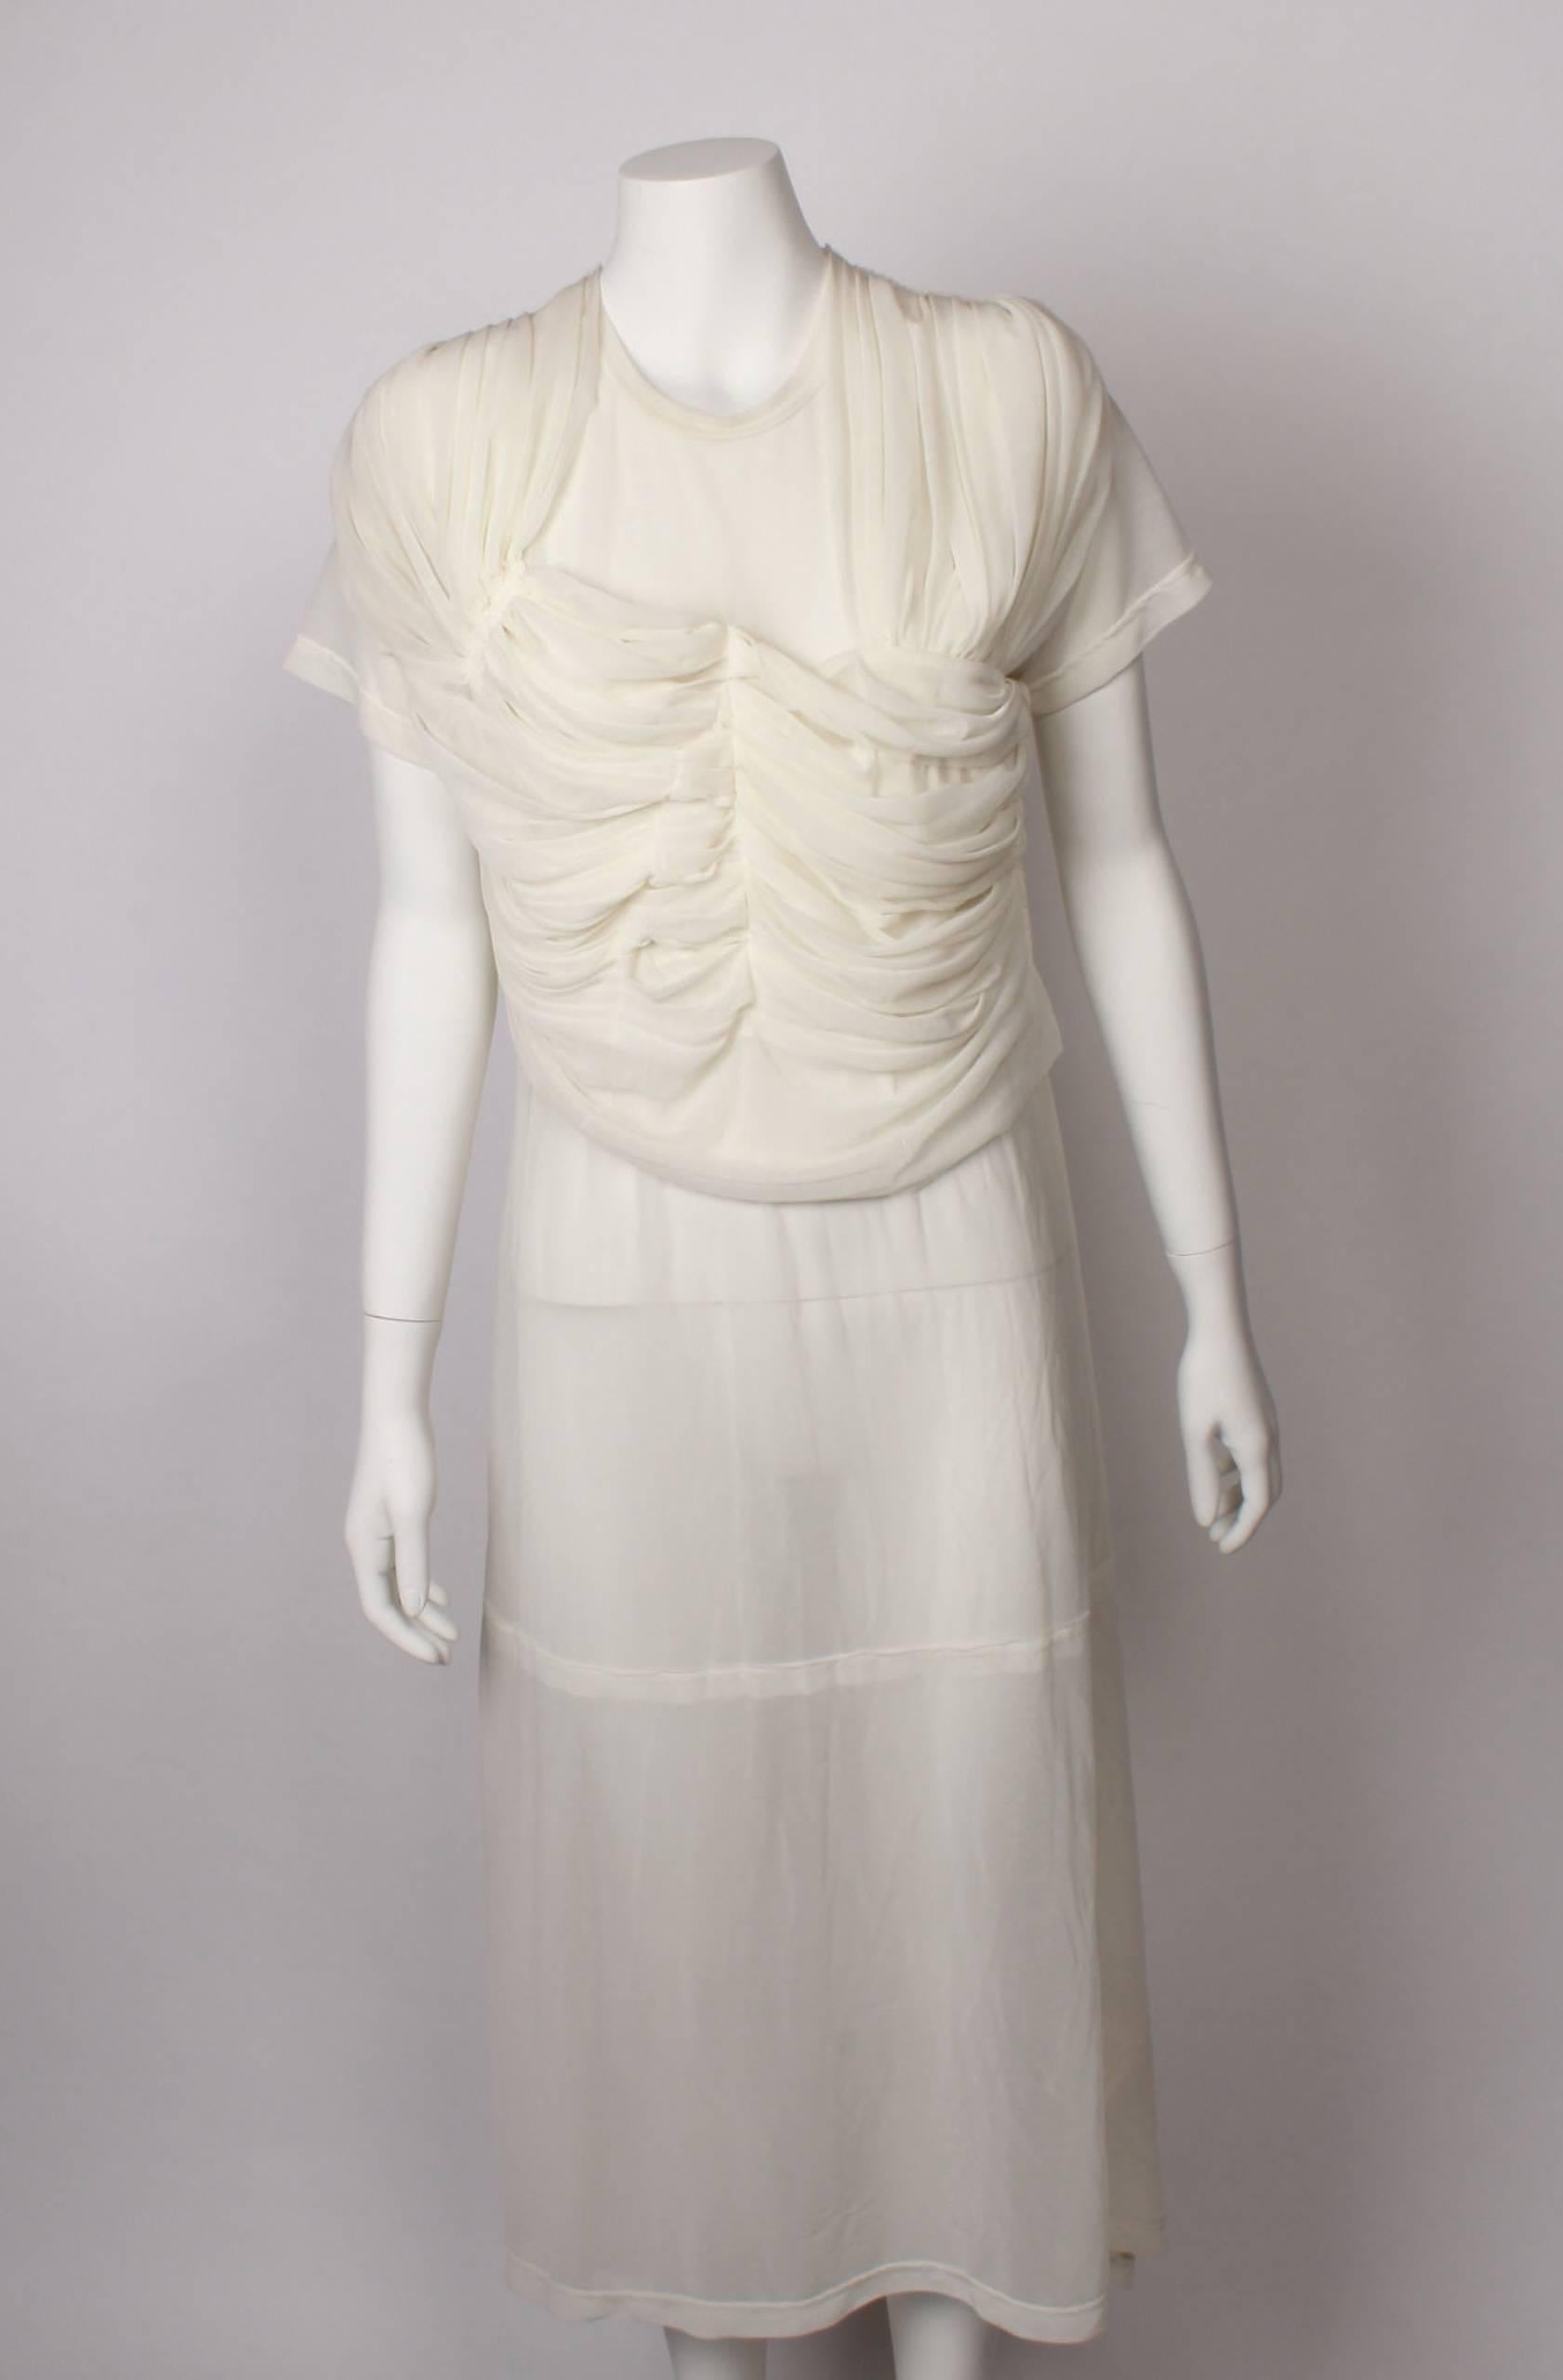 Comme Des Garcons sheer silk jersey draped dress. Stunning and elegant, featuring short sleeve and draped bodice to hip.
Hemline is curved and slightly longer at the back. 
Beautiful and timeless. A classic for the CDG enthusiast!